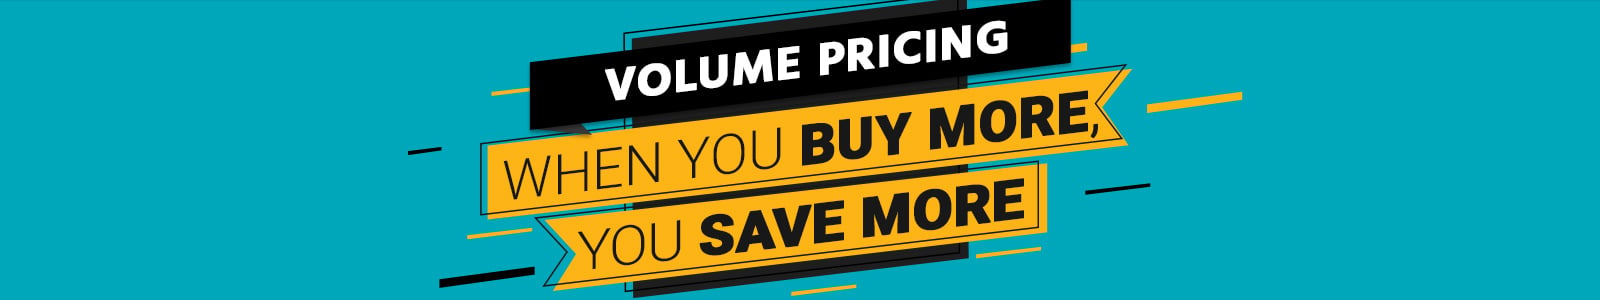 New Volume Pricing
When you buy more, you save more
Shop Now